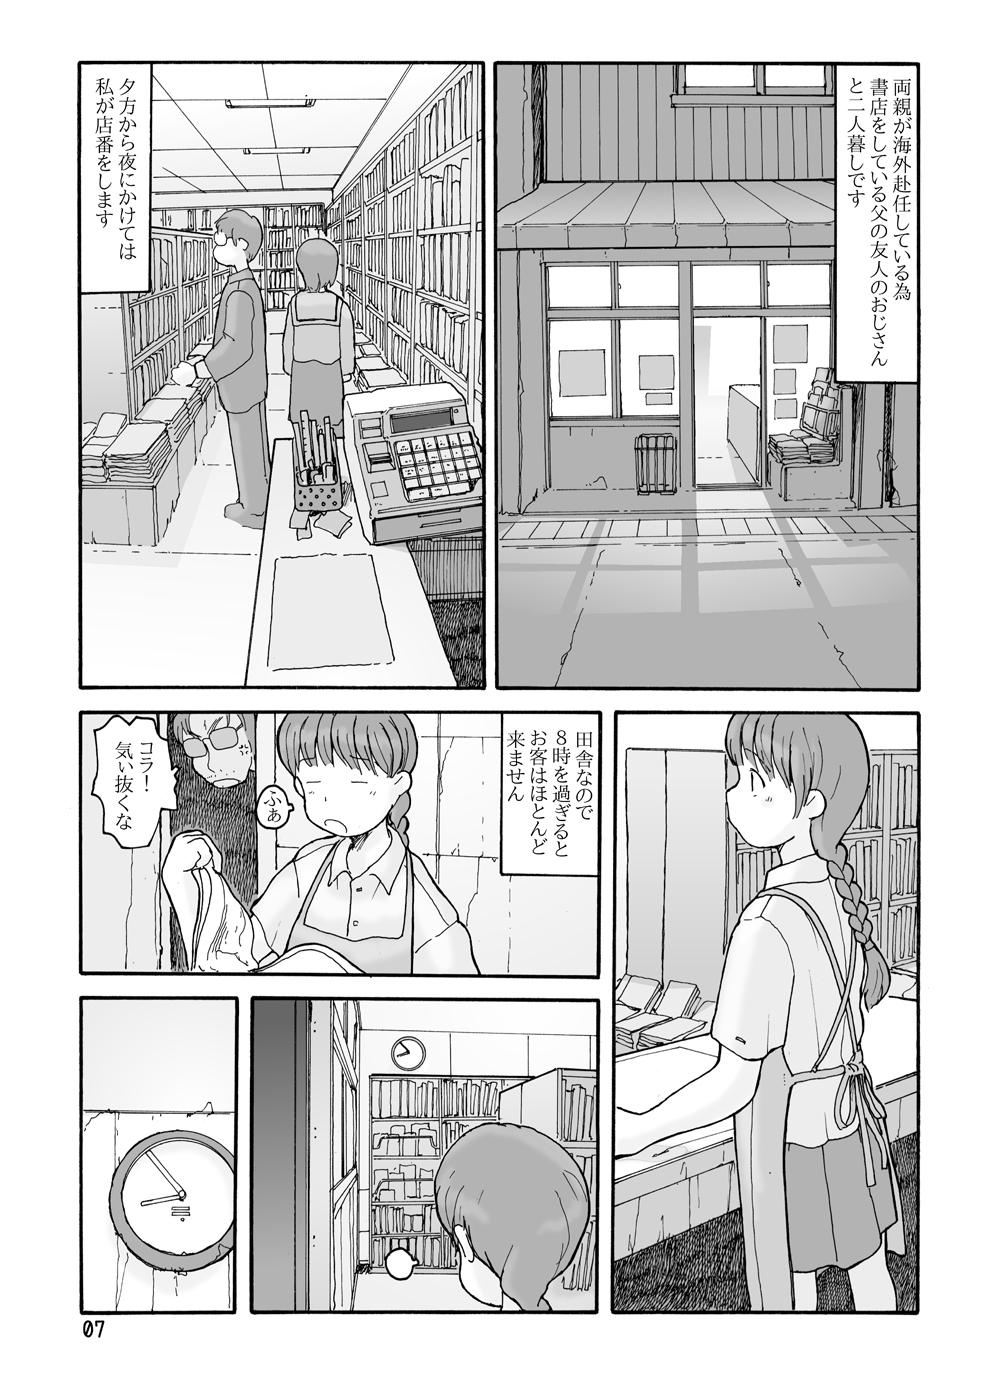 Spit 南蓑荷 DLver Eating Pussy - Page 6